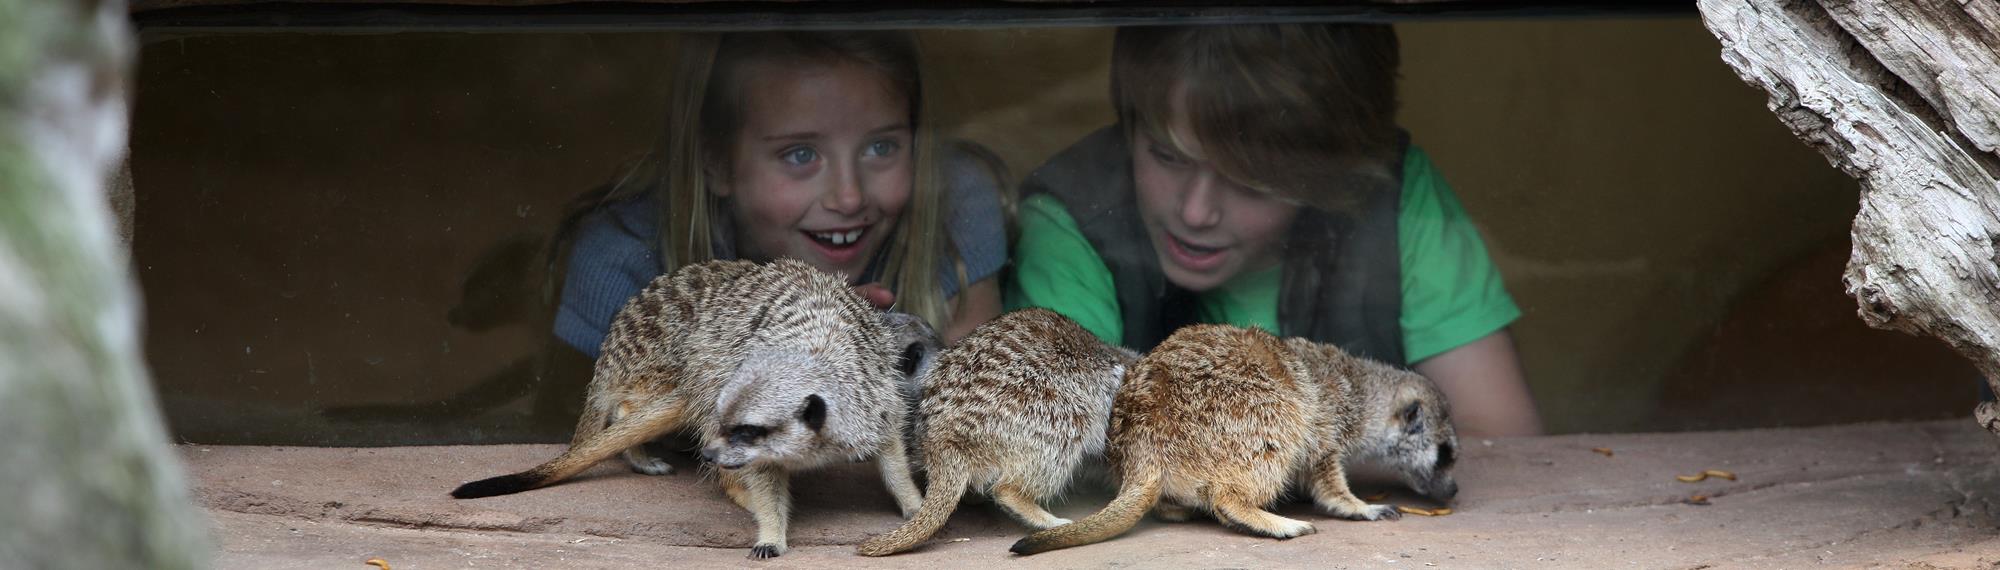 A boy and girl observing three meerkats, eating meal worms on a rock, through a window. Children look amazed at how close the meerkats are. 